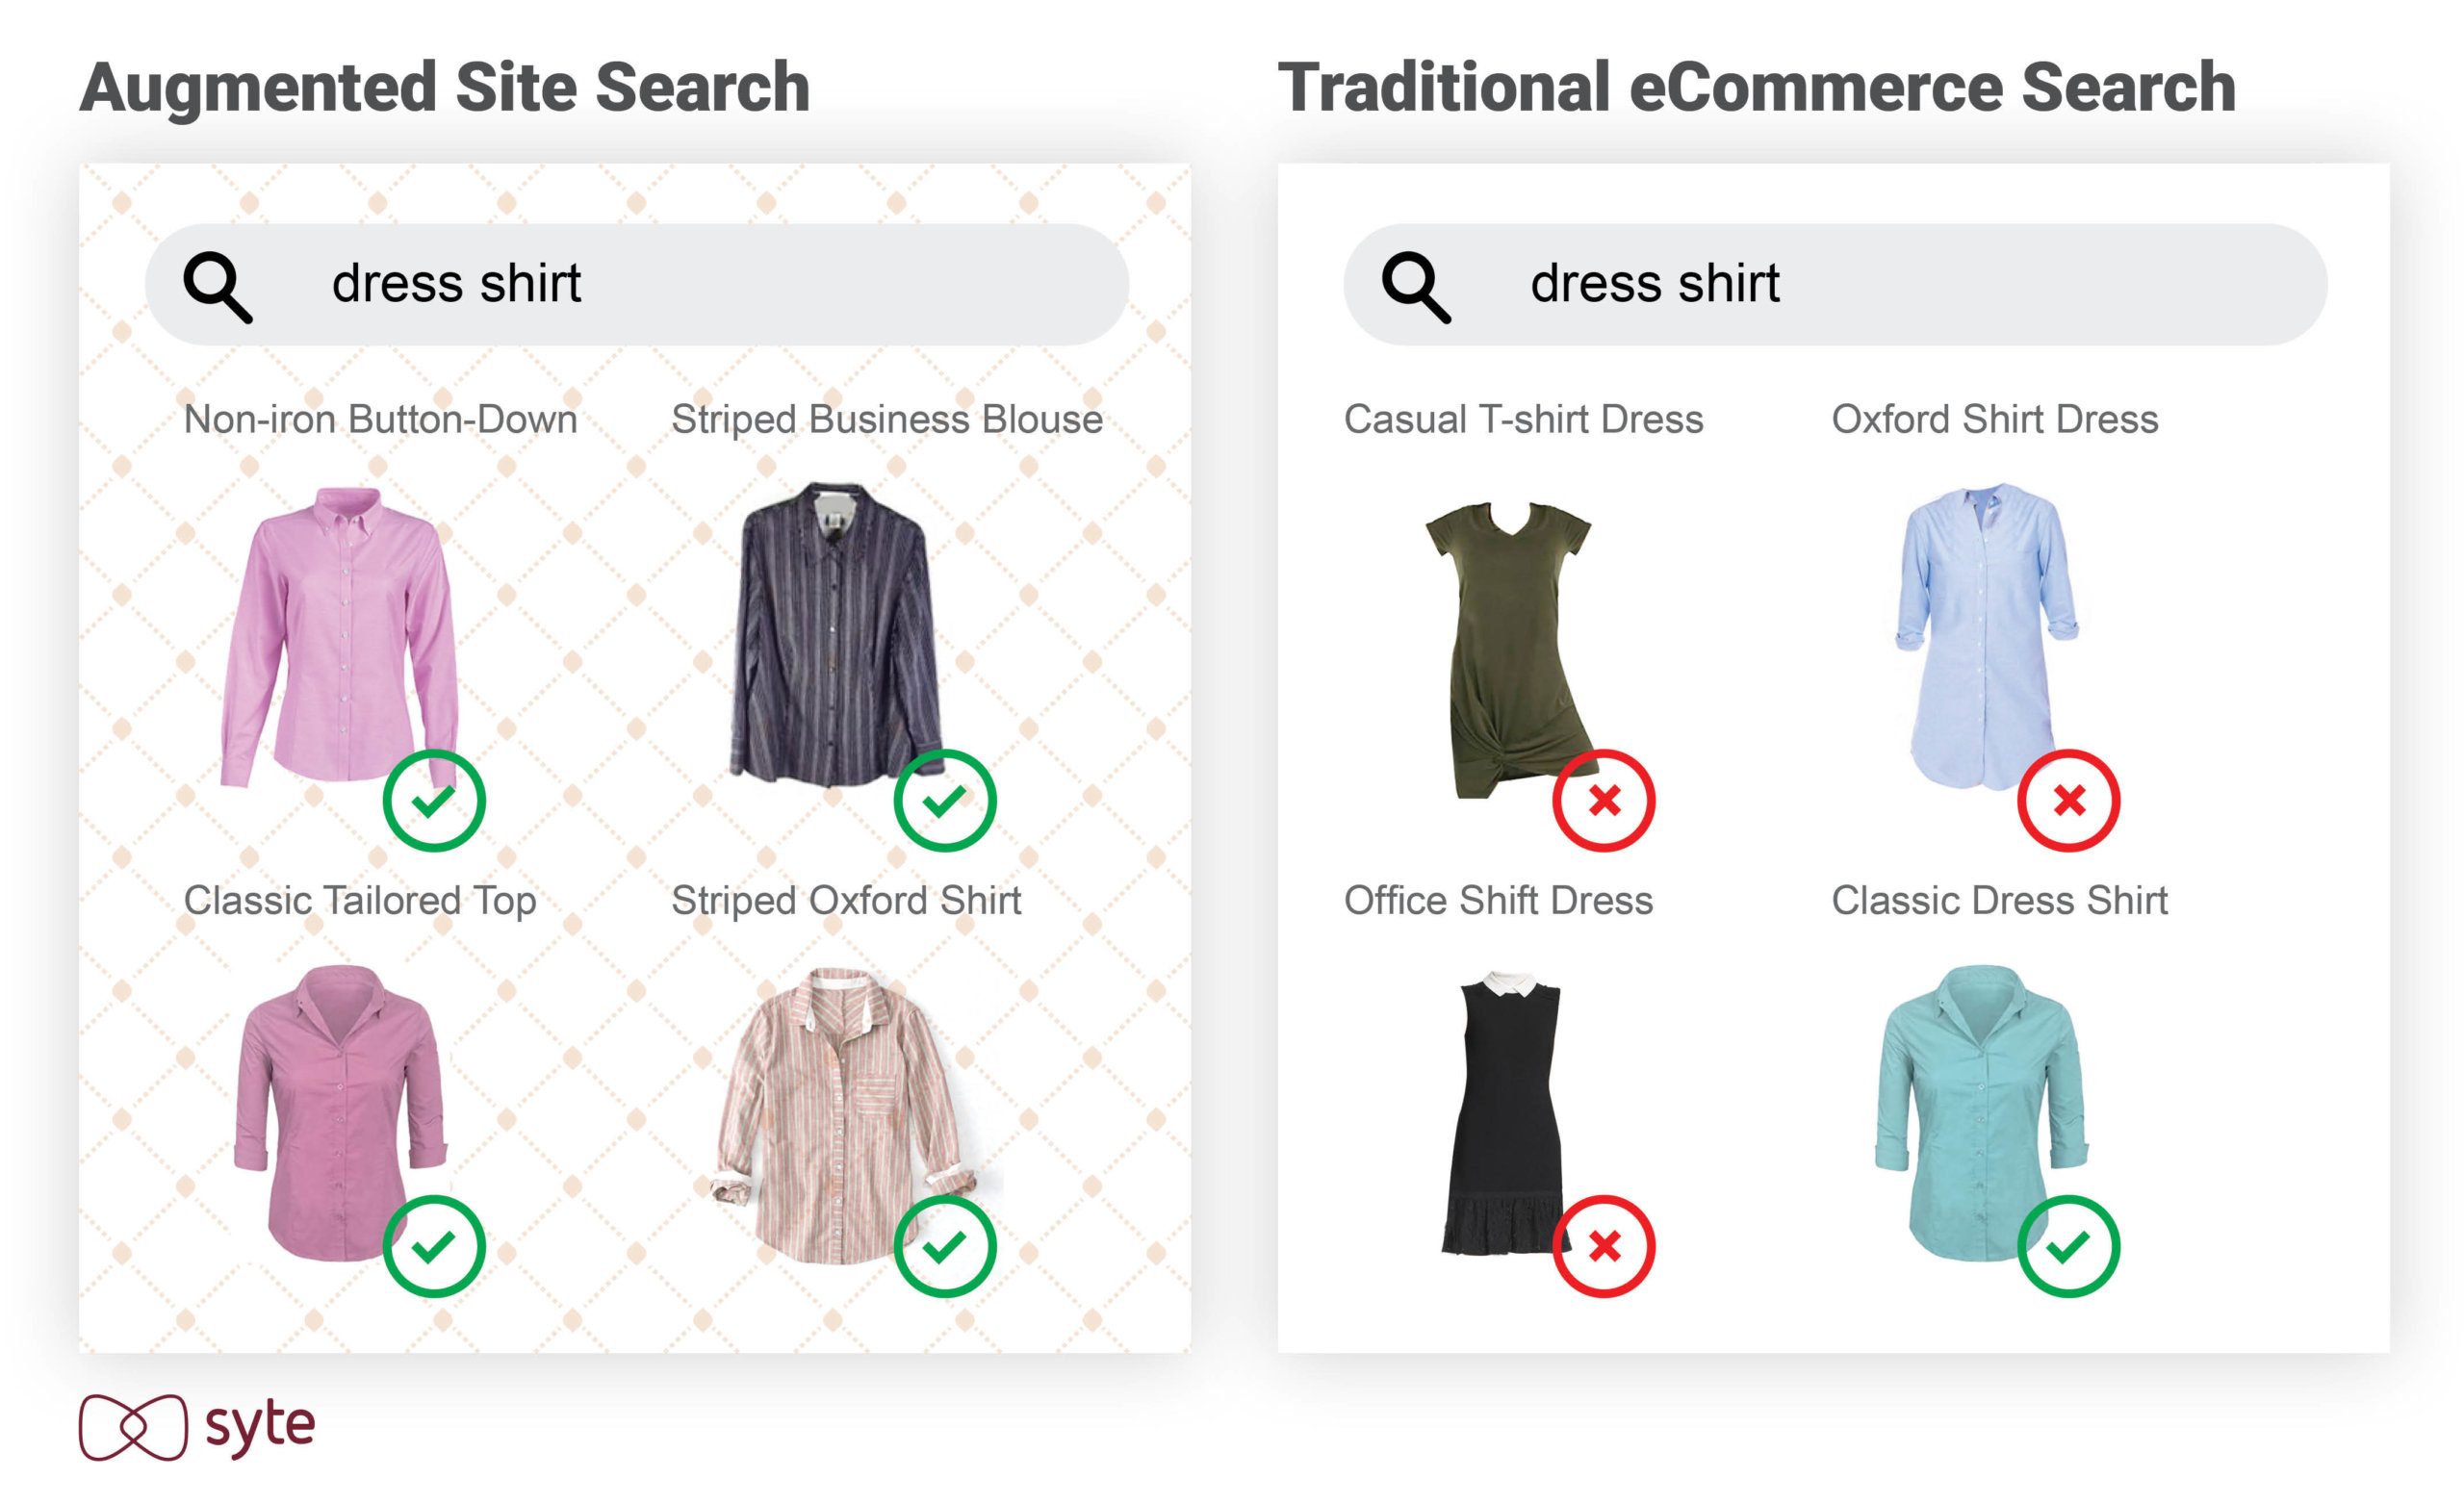 Syte's eCommerce search solution